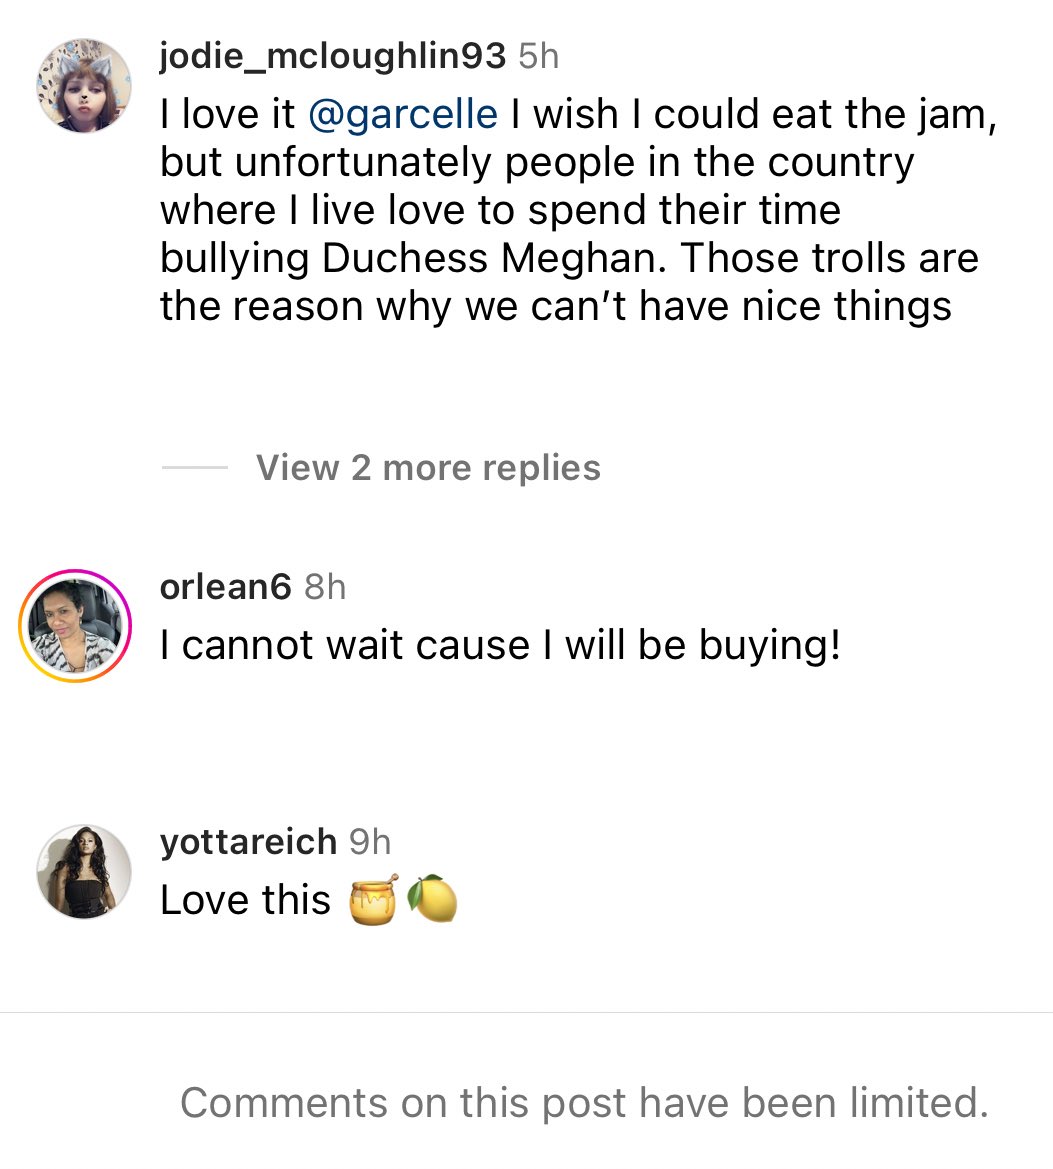 Garcelle Beauvais had to limit her IG comments after sharing a post of Meg’s jam. This woman has gone from royalty to being the most reviled woman in the world, having to peddle jam just to stay relevant. Cheers to living your best life, Meg! #MeghanMarkIe #Meghan50JarsOfJam